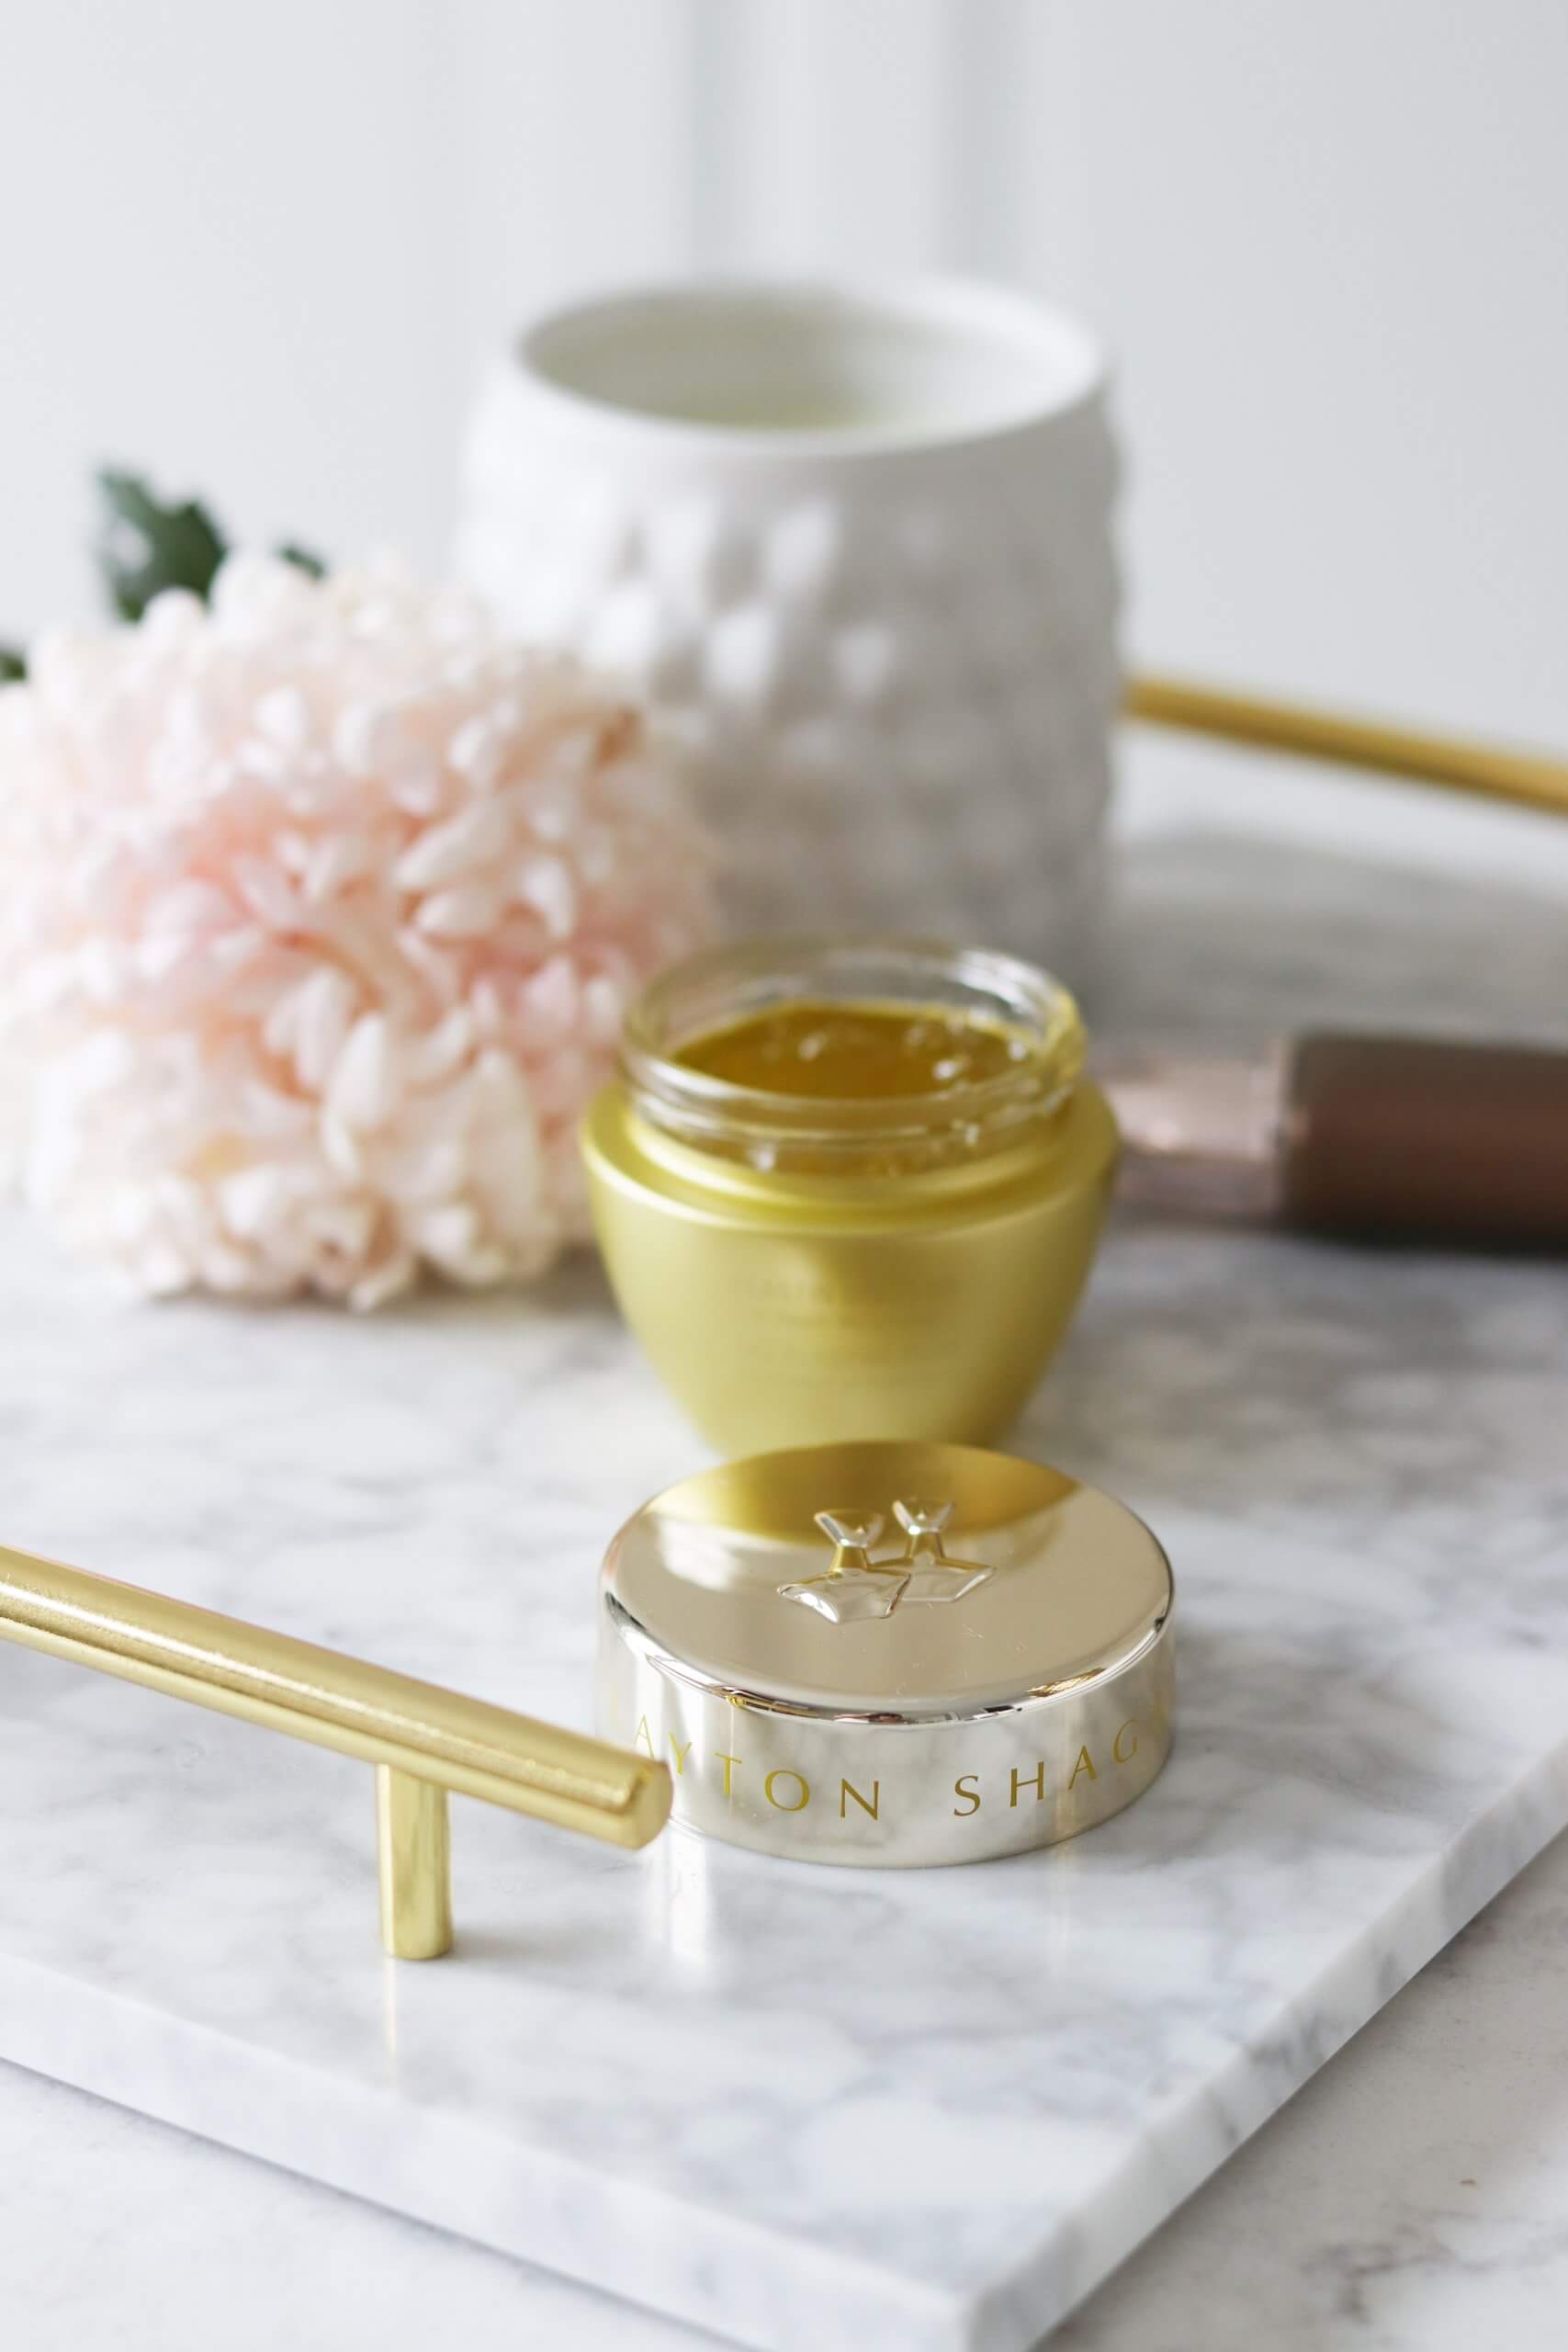 Canadian Skincare from La Maison Clayton Shagal Review